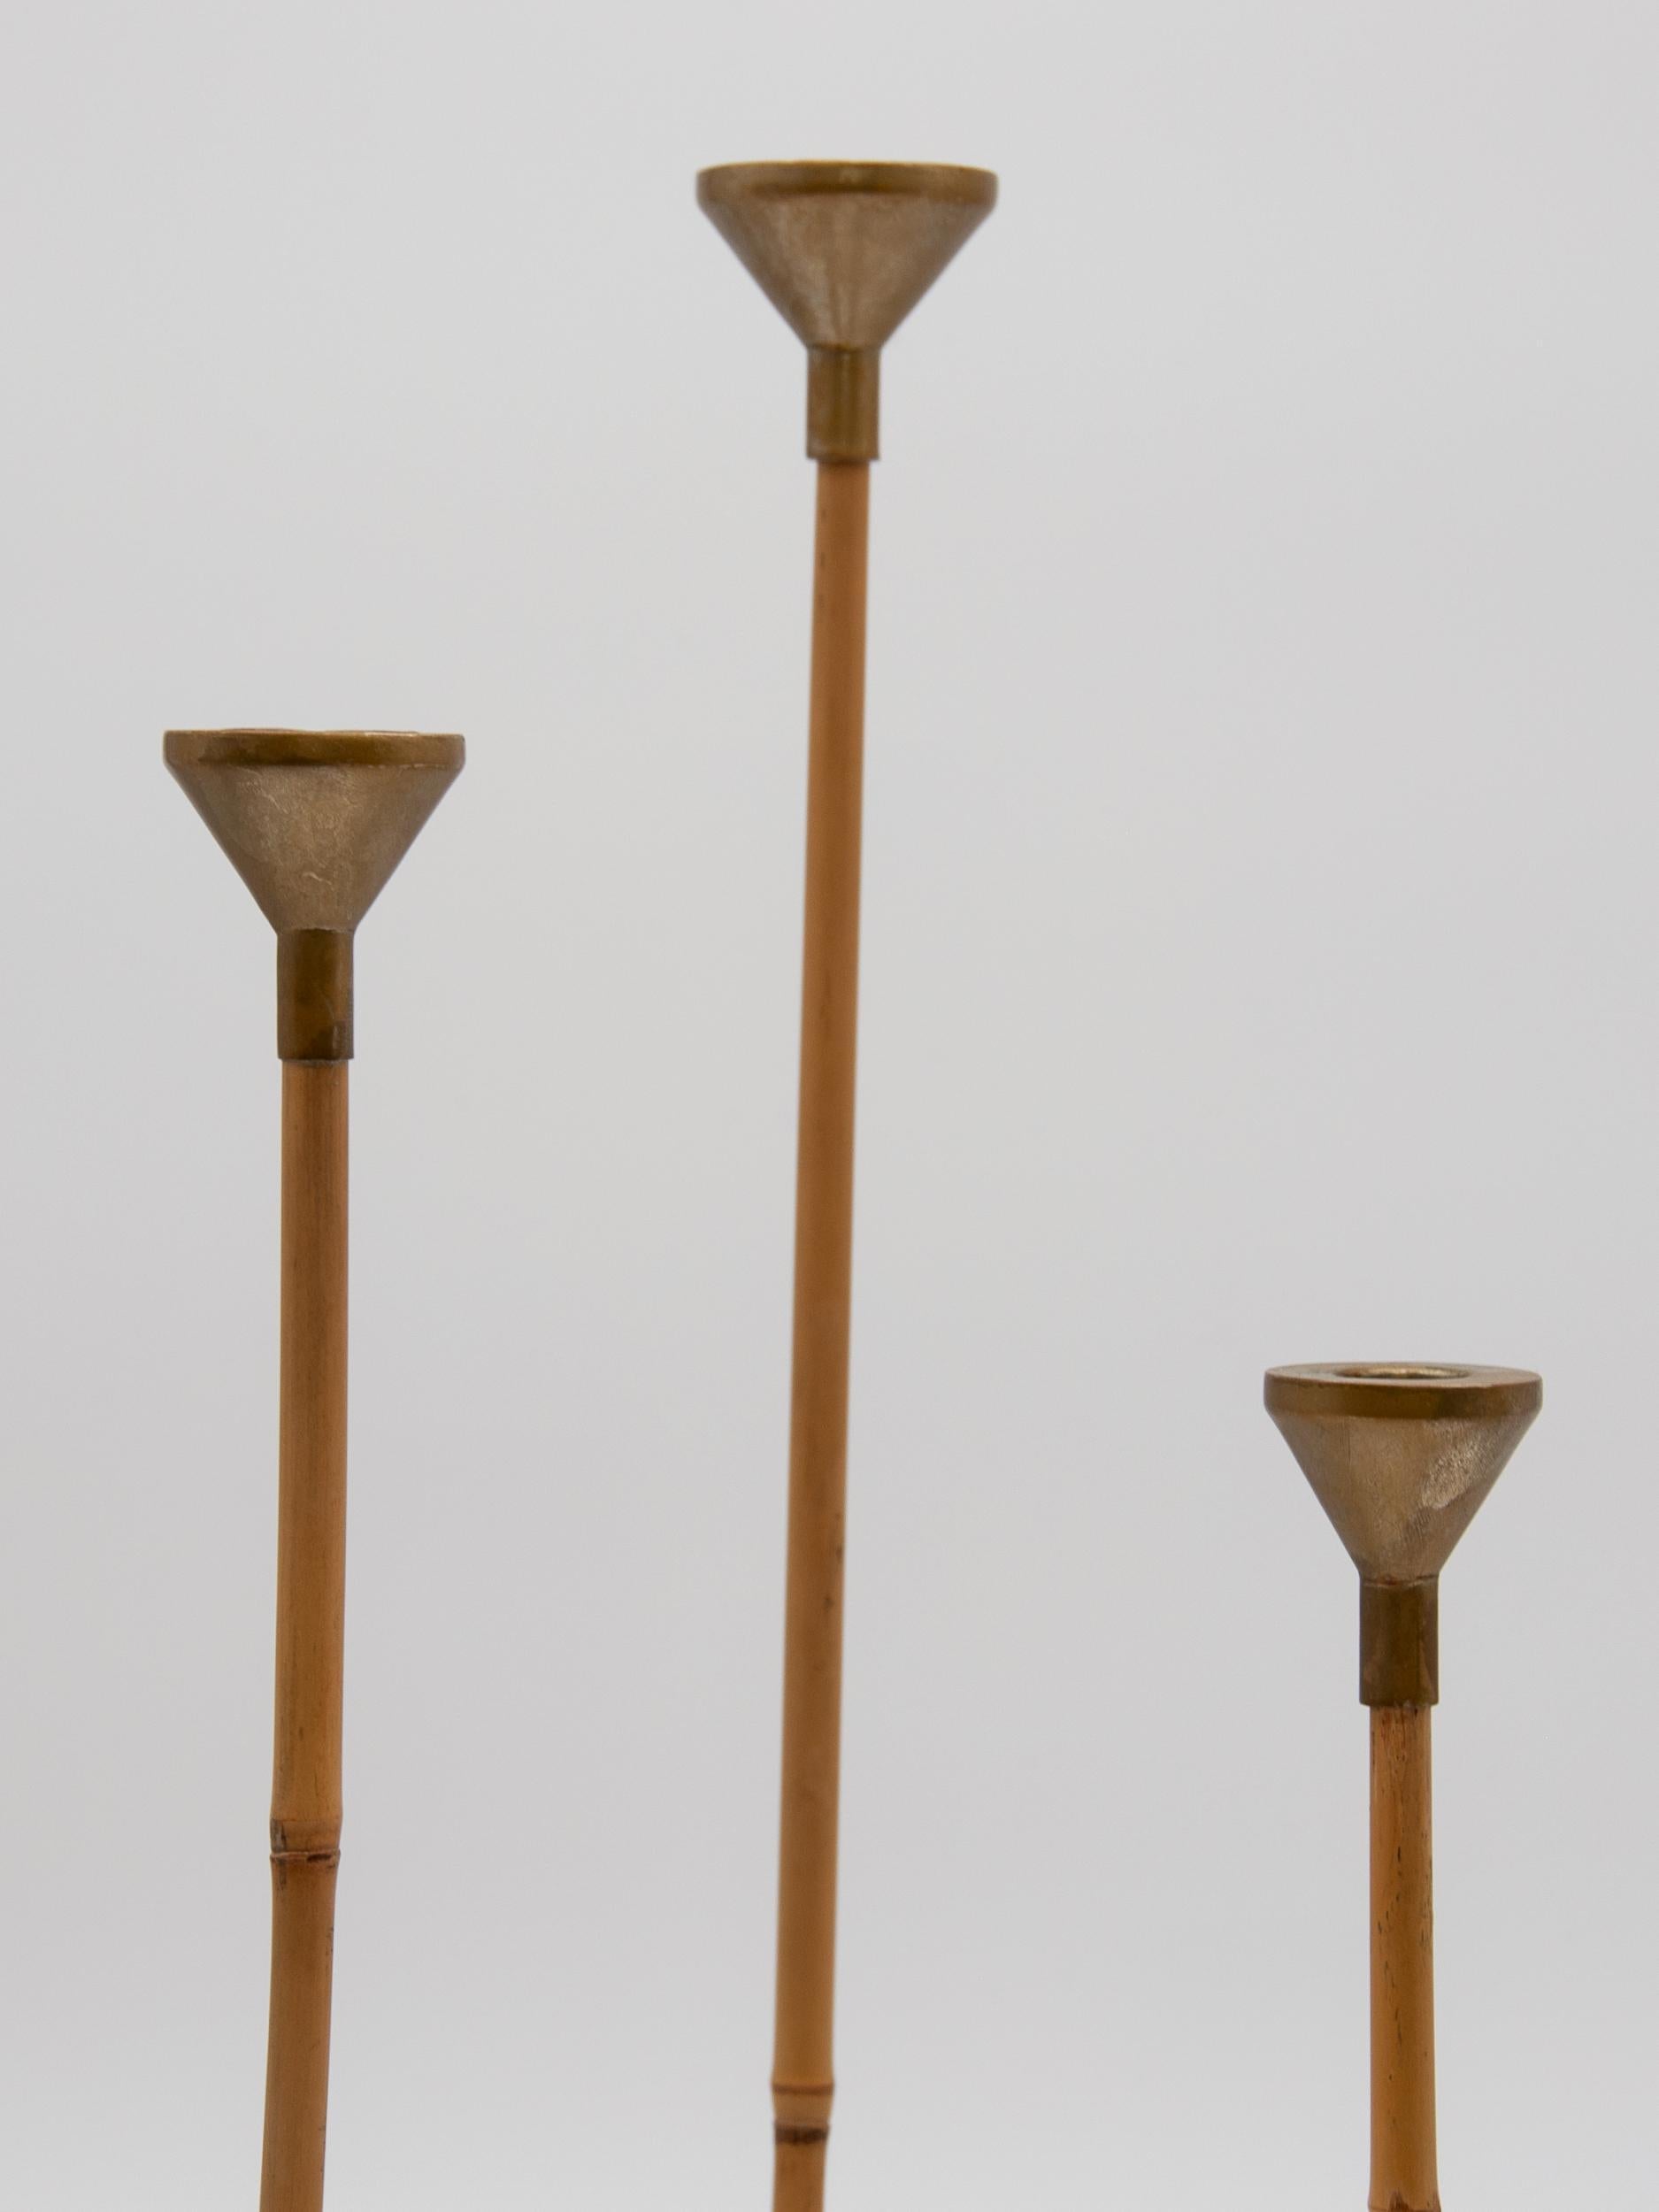 Set of Three Bamboo and Brass Candlesticks In Good Condition For Sale In South Salem, NY